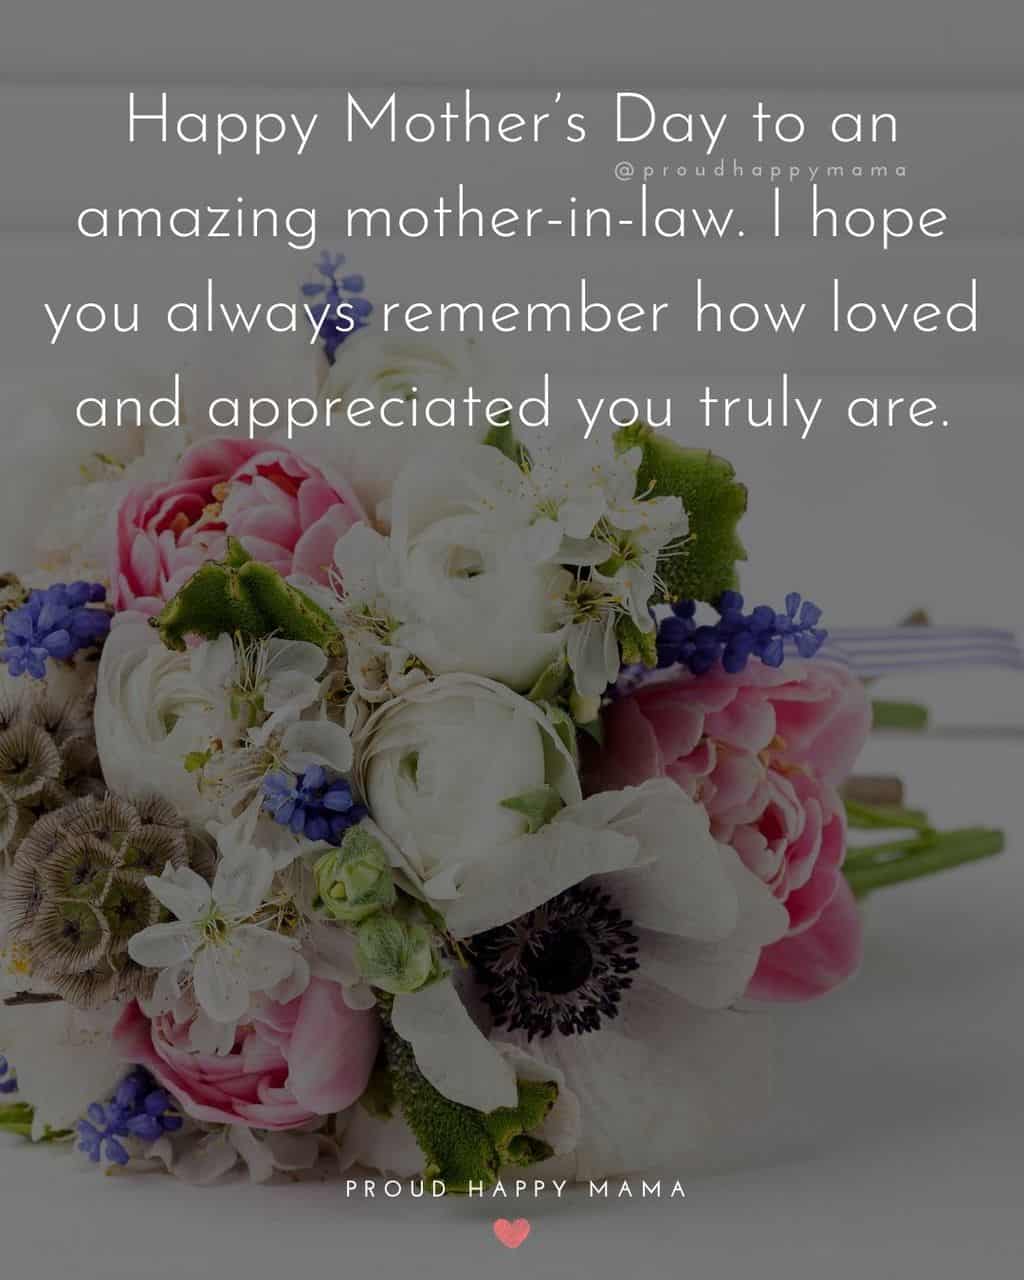 Happy Mothers Day Quotes For Mother In Law - Happy Mother’s Day to an amazing mother in law. I hope you always remember how loved